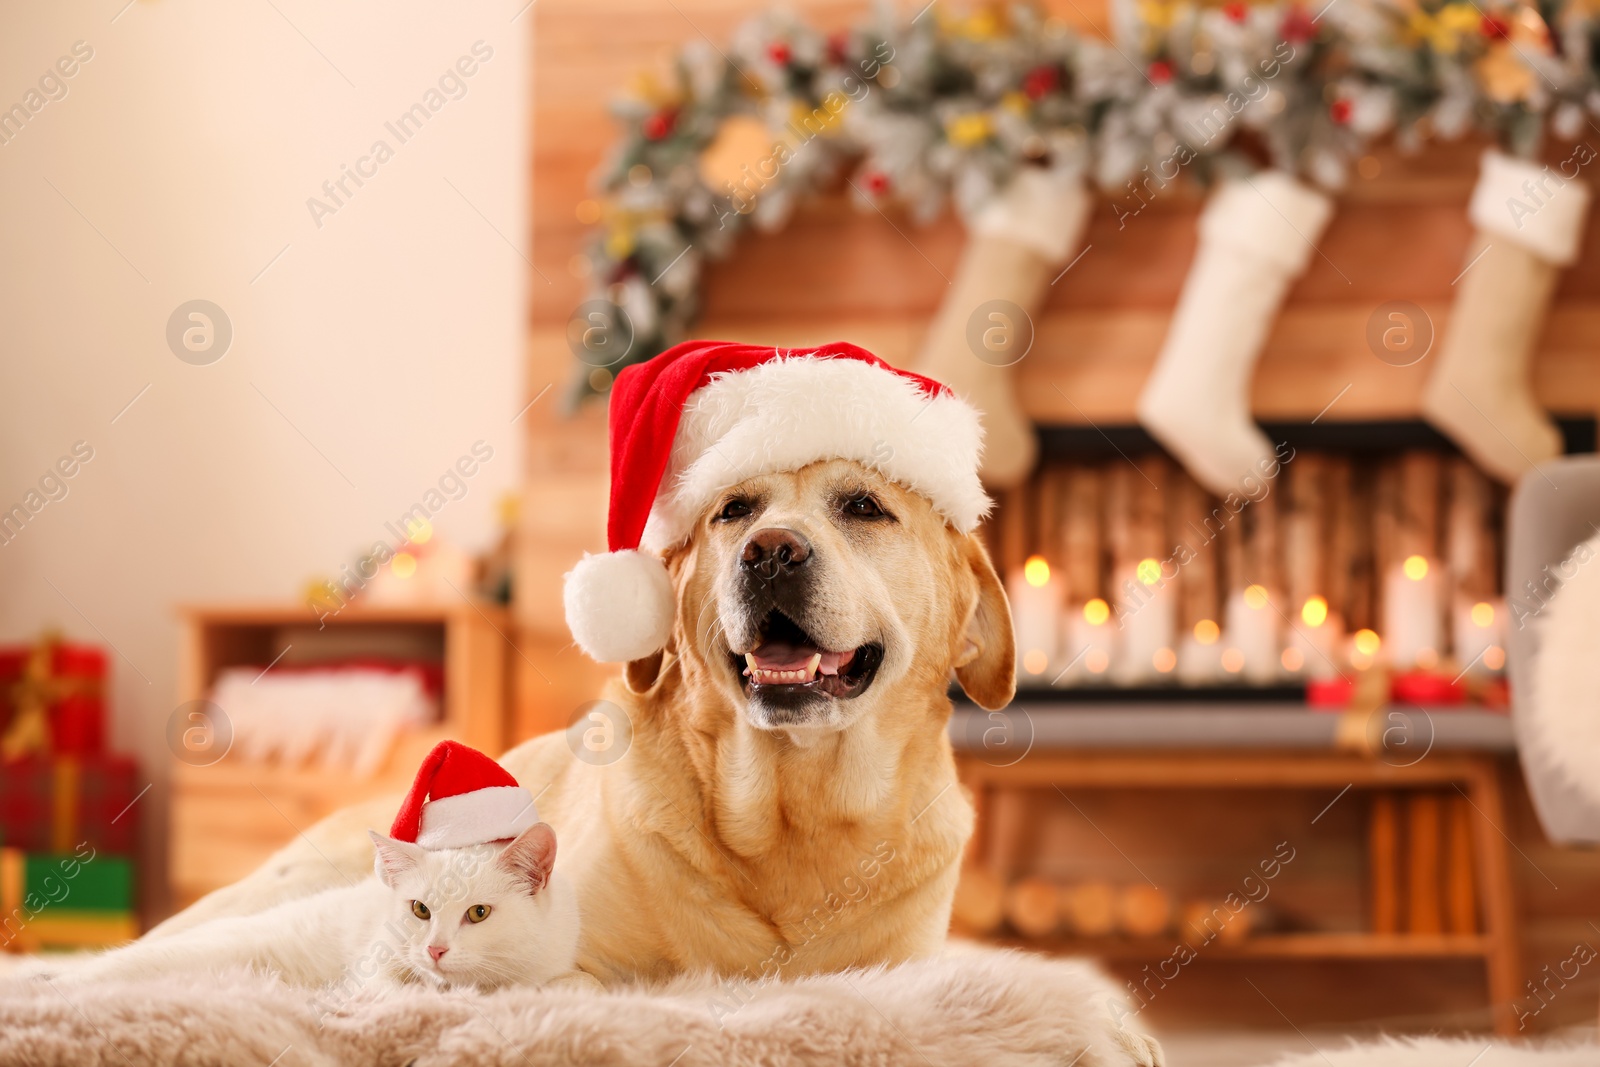 Photo of Adorable dog and cat wearing Santa hats together at room decorated for Christmas. Cute pets